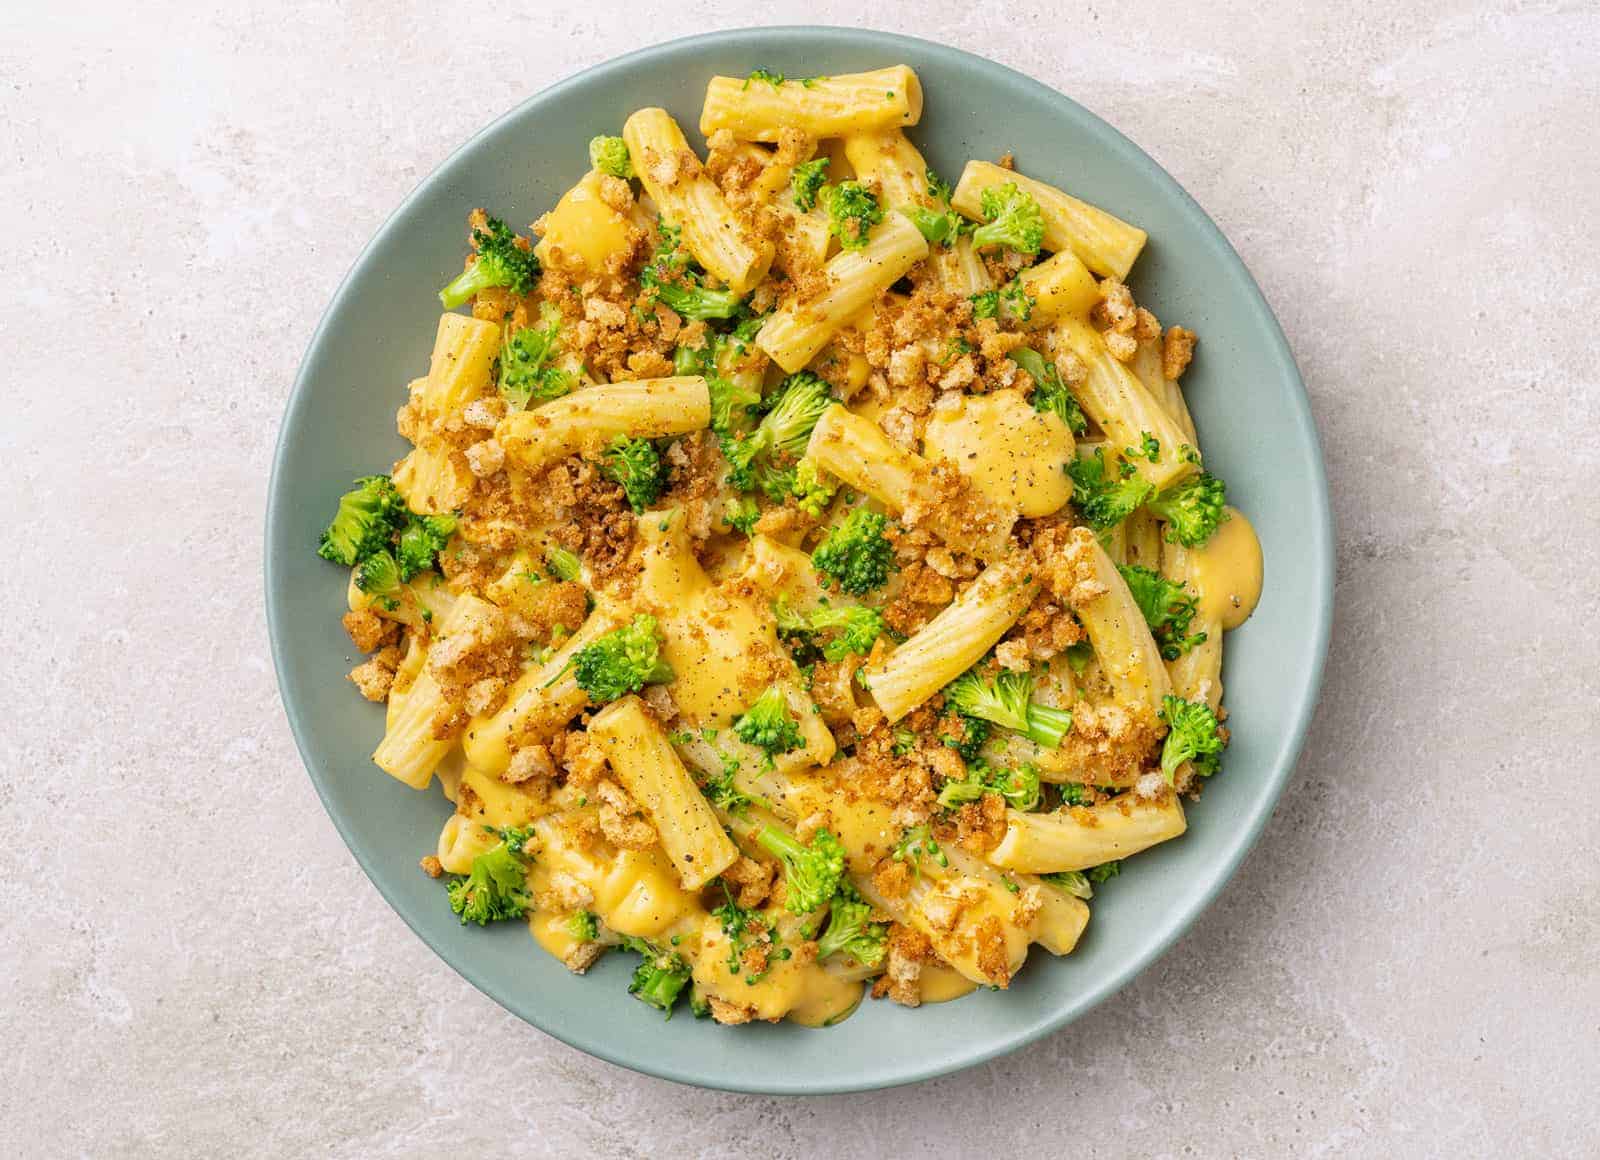 A blue plate of rigatoni tossed in a creamy cheese sauce topped with browned breadcrumbs and small chunks of broccoli.